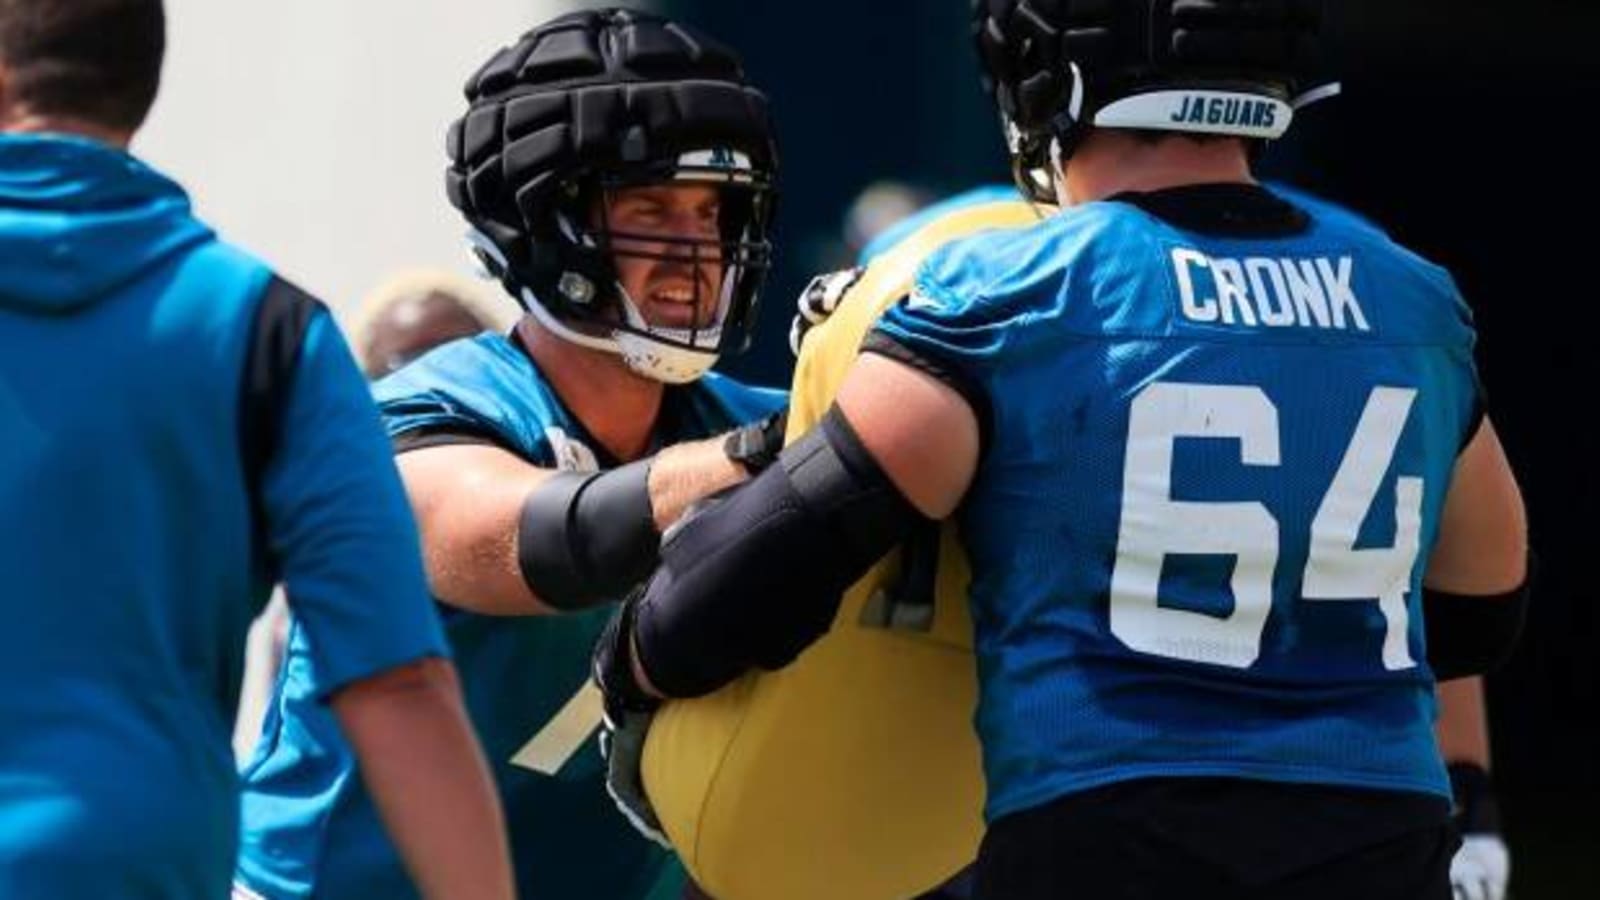 Walker Little’s Biggest Opportunity With the Jaguars Yet Comes at the Perfect Time